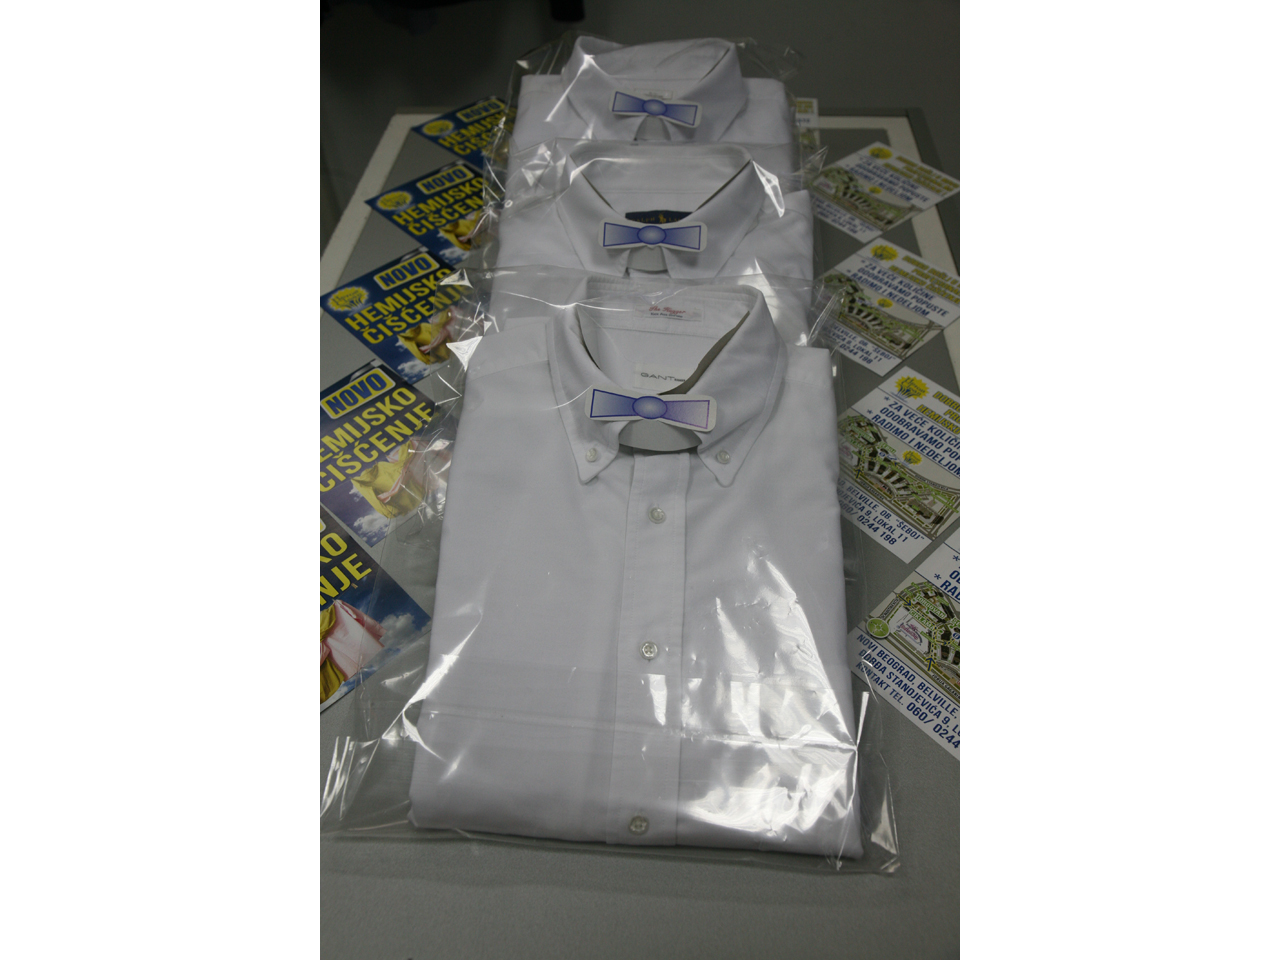 HERON DRY CLEANING Dry-cleaning Beograd